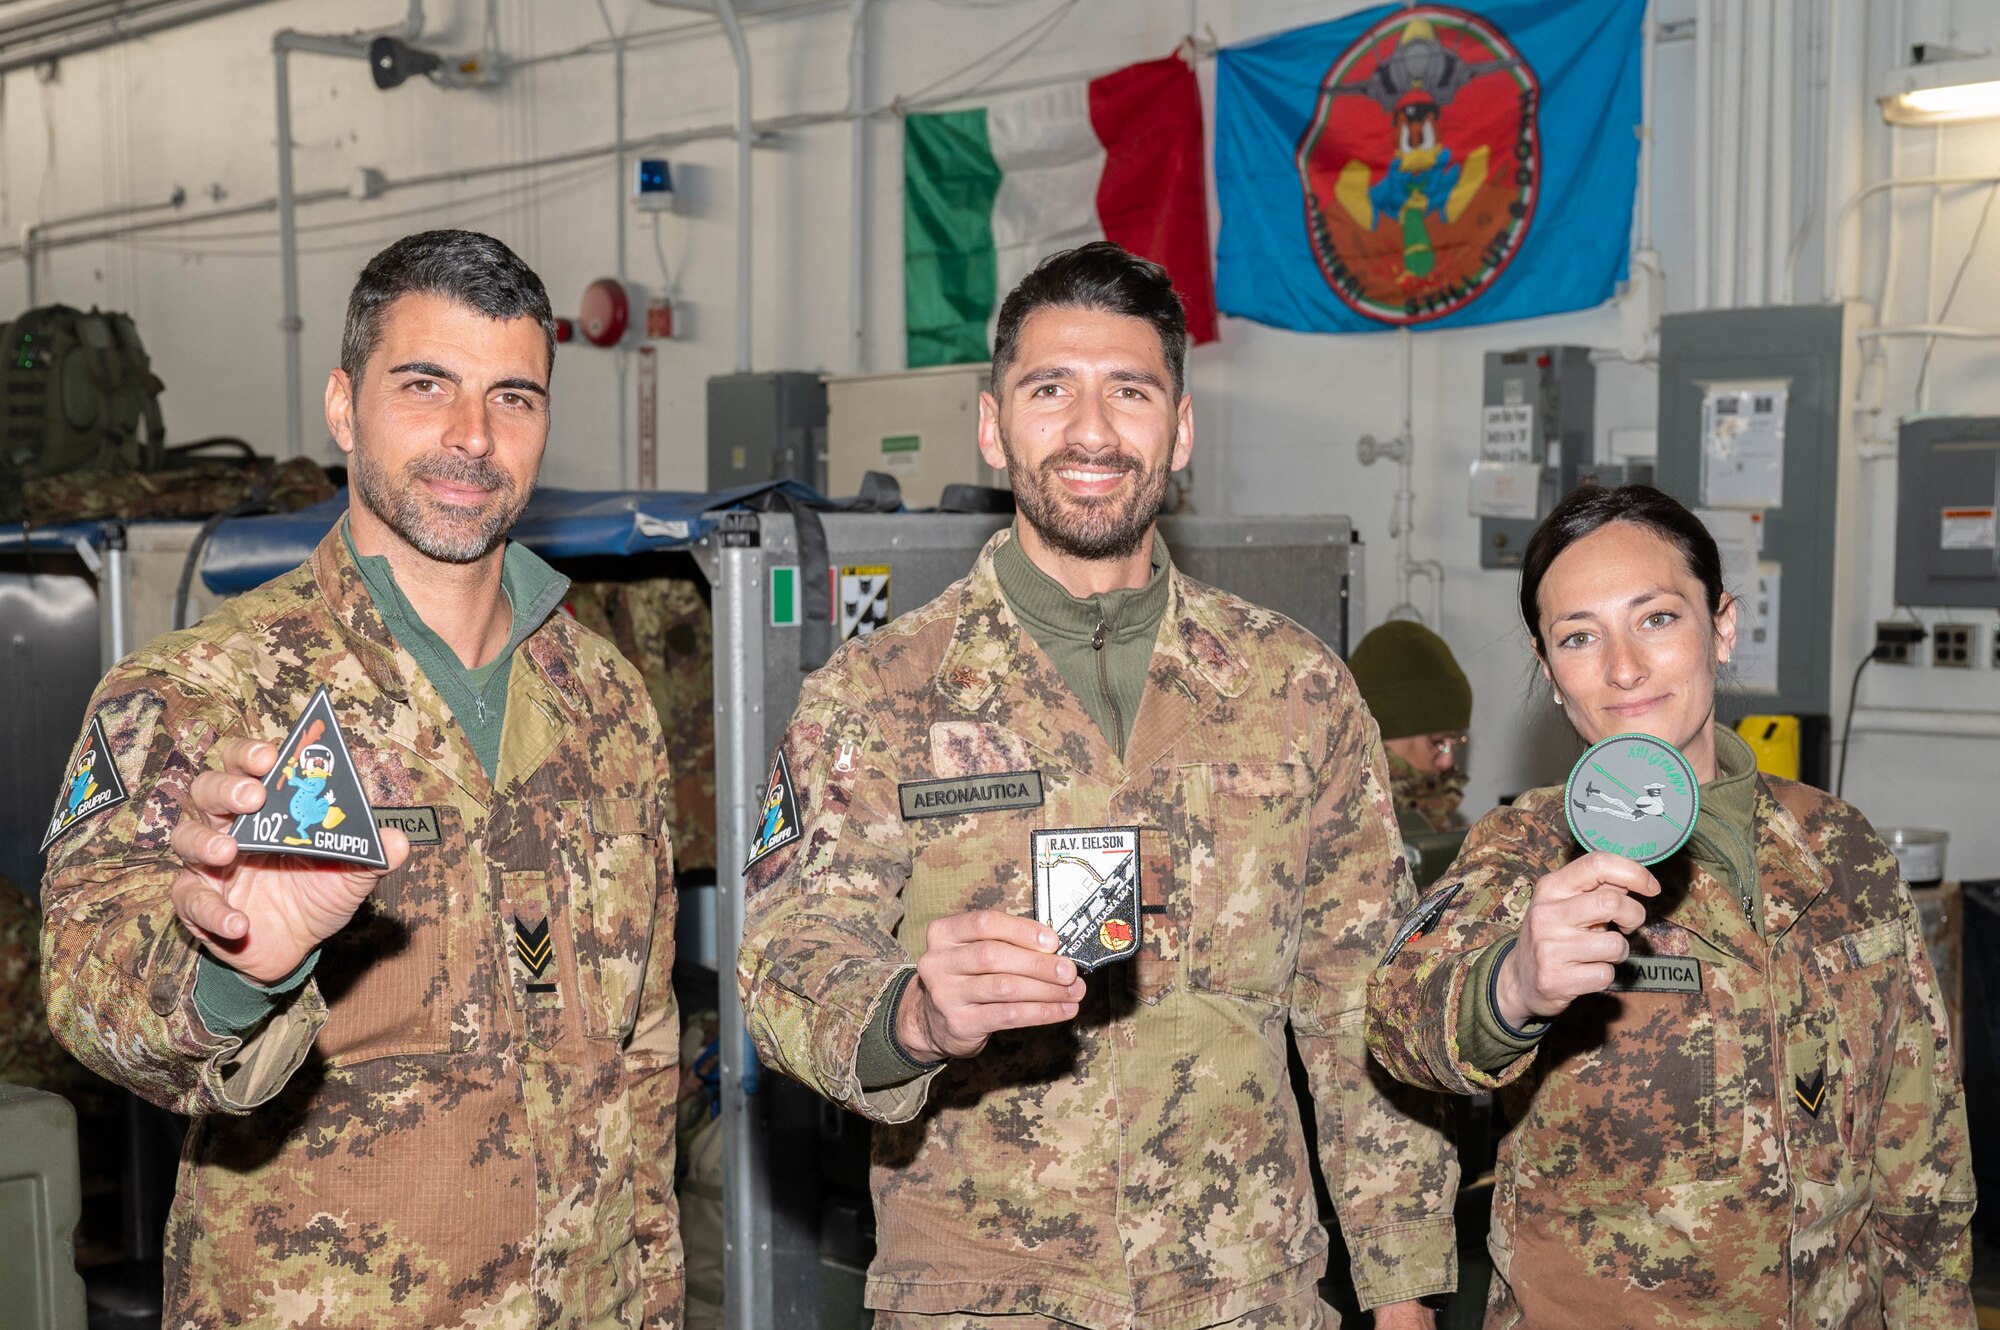 Italian Air Force service members pose for a photo with their custom patches.